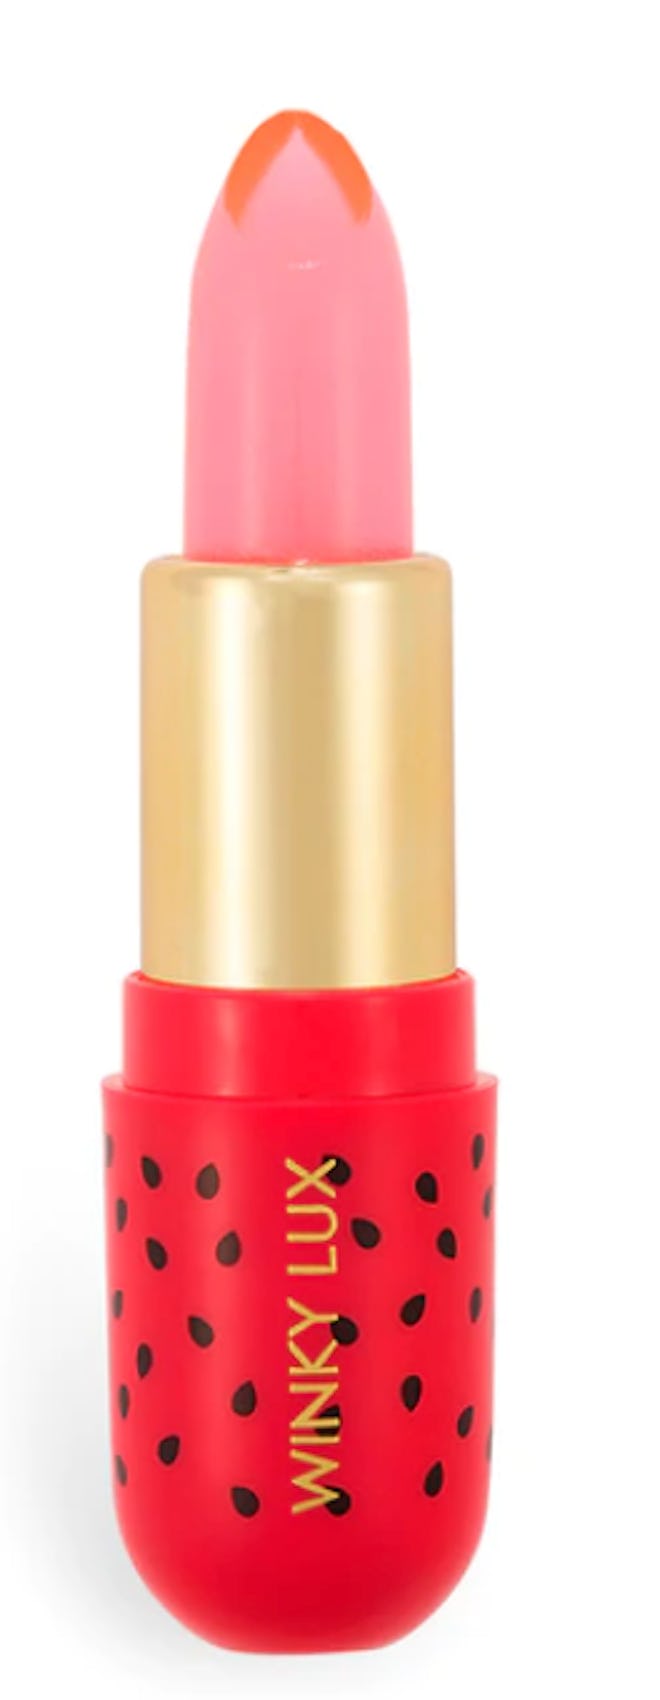 Winky Lux Watermelon Jelly pH Lip Balm for no-makeup makeup look